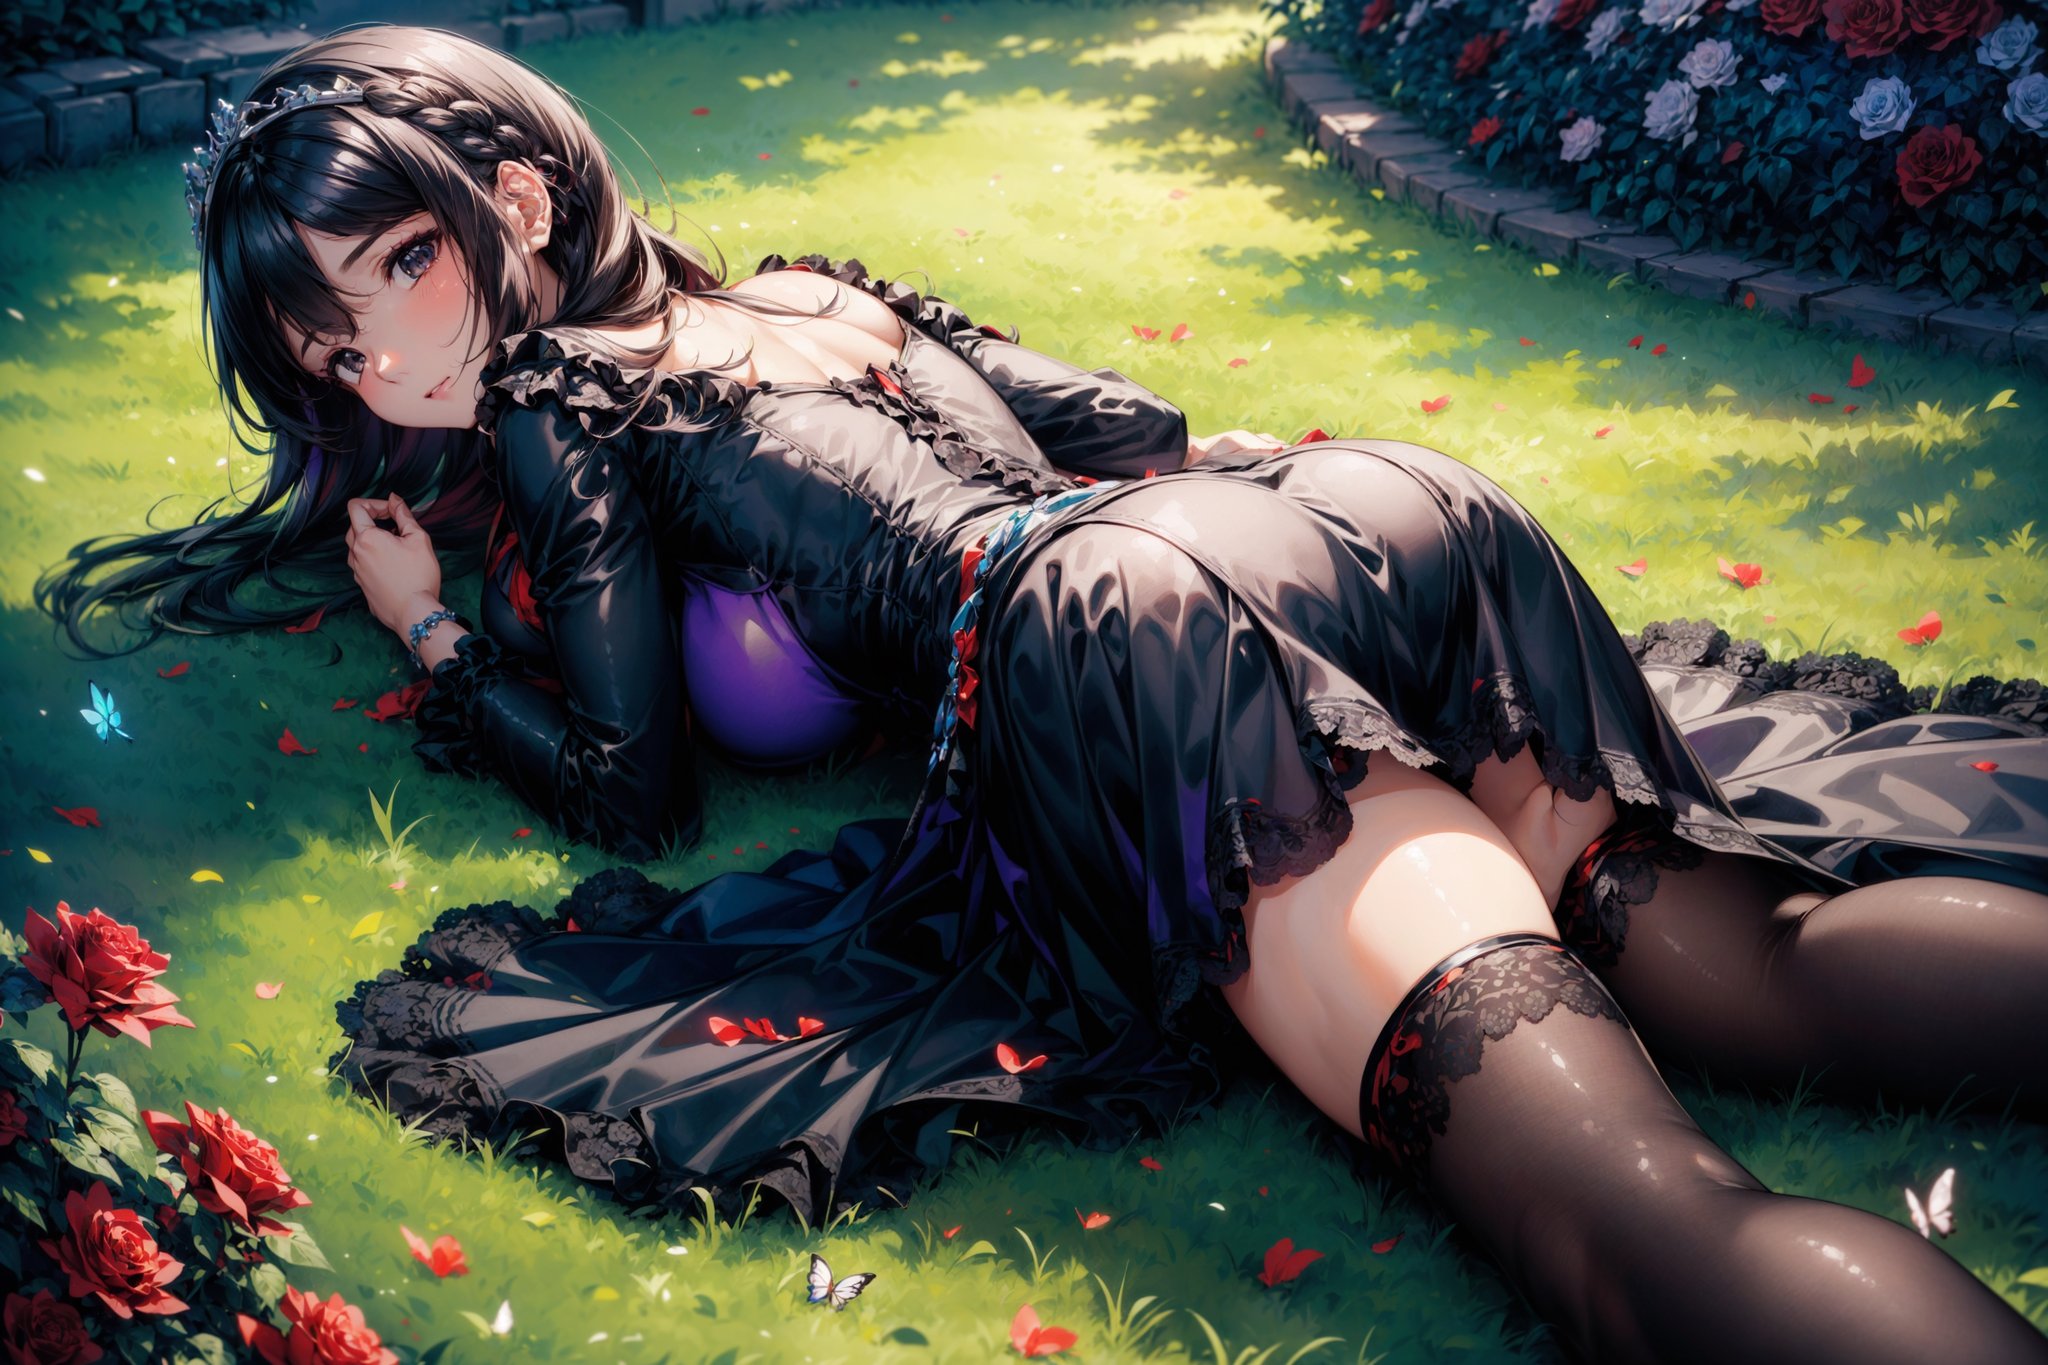 (best quality, masterpiece, illustration, designer, lighting), (extremely detailed CG 8k wallpaper unit), (detailed and expressive eyes), detailed particles, beautiful lighting , ((  a girl( long scarlet hair, big breasts,scarlet eyes) ,a boy(black hair ,black eyes),back to back, holding 1 katana)), ,wearing a teddy bear tiara, donning a beautiful black and red dress with ruffles and lace, sheer black stockings, transparent aquamarine crystal shoes, chest bows,  butterflies around, (Pixiv anime style),(manga style),background, garden, colored flowers,butterflies, Rose, flowers covering her, (aerial view), grass, looking to viewer, flower background,road of flowers,drow